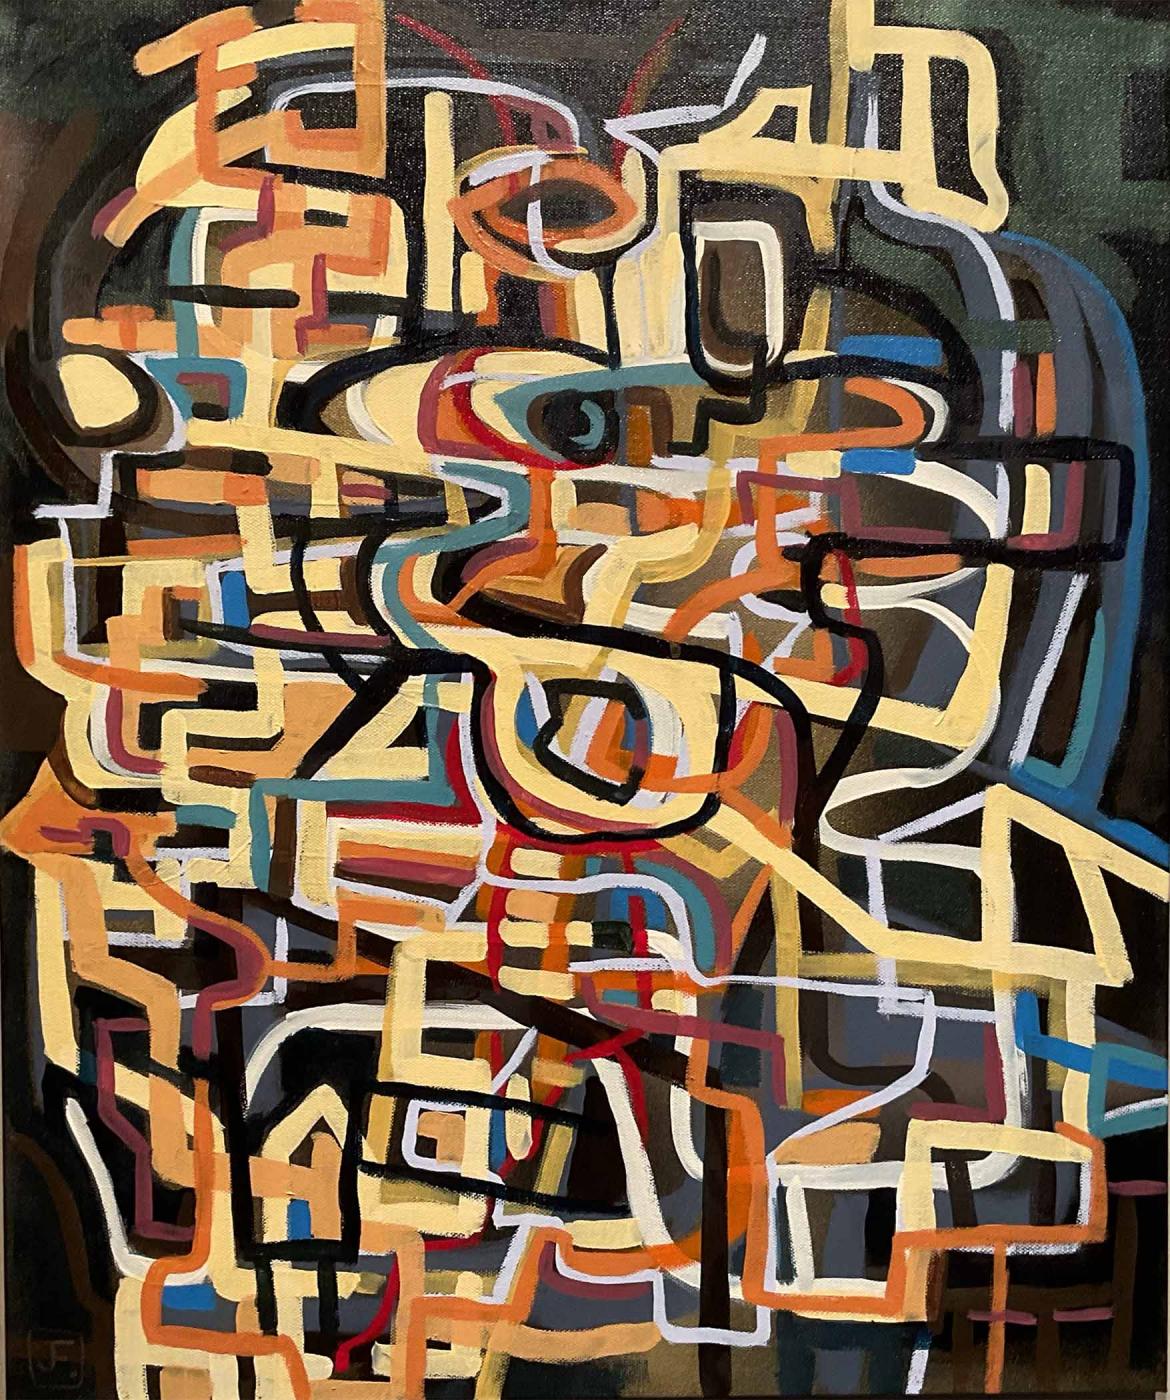 There is a tangle of lines of various colors that come together closer to the left side of the canvas. The angles and marks are abstract and criss cross on a black background.